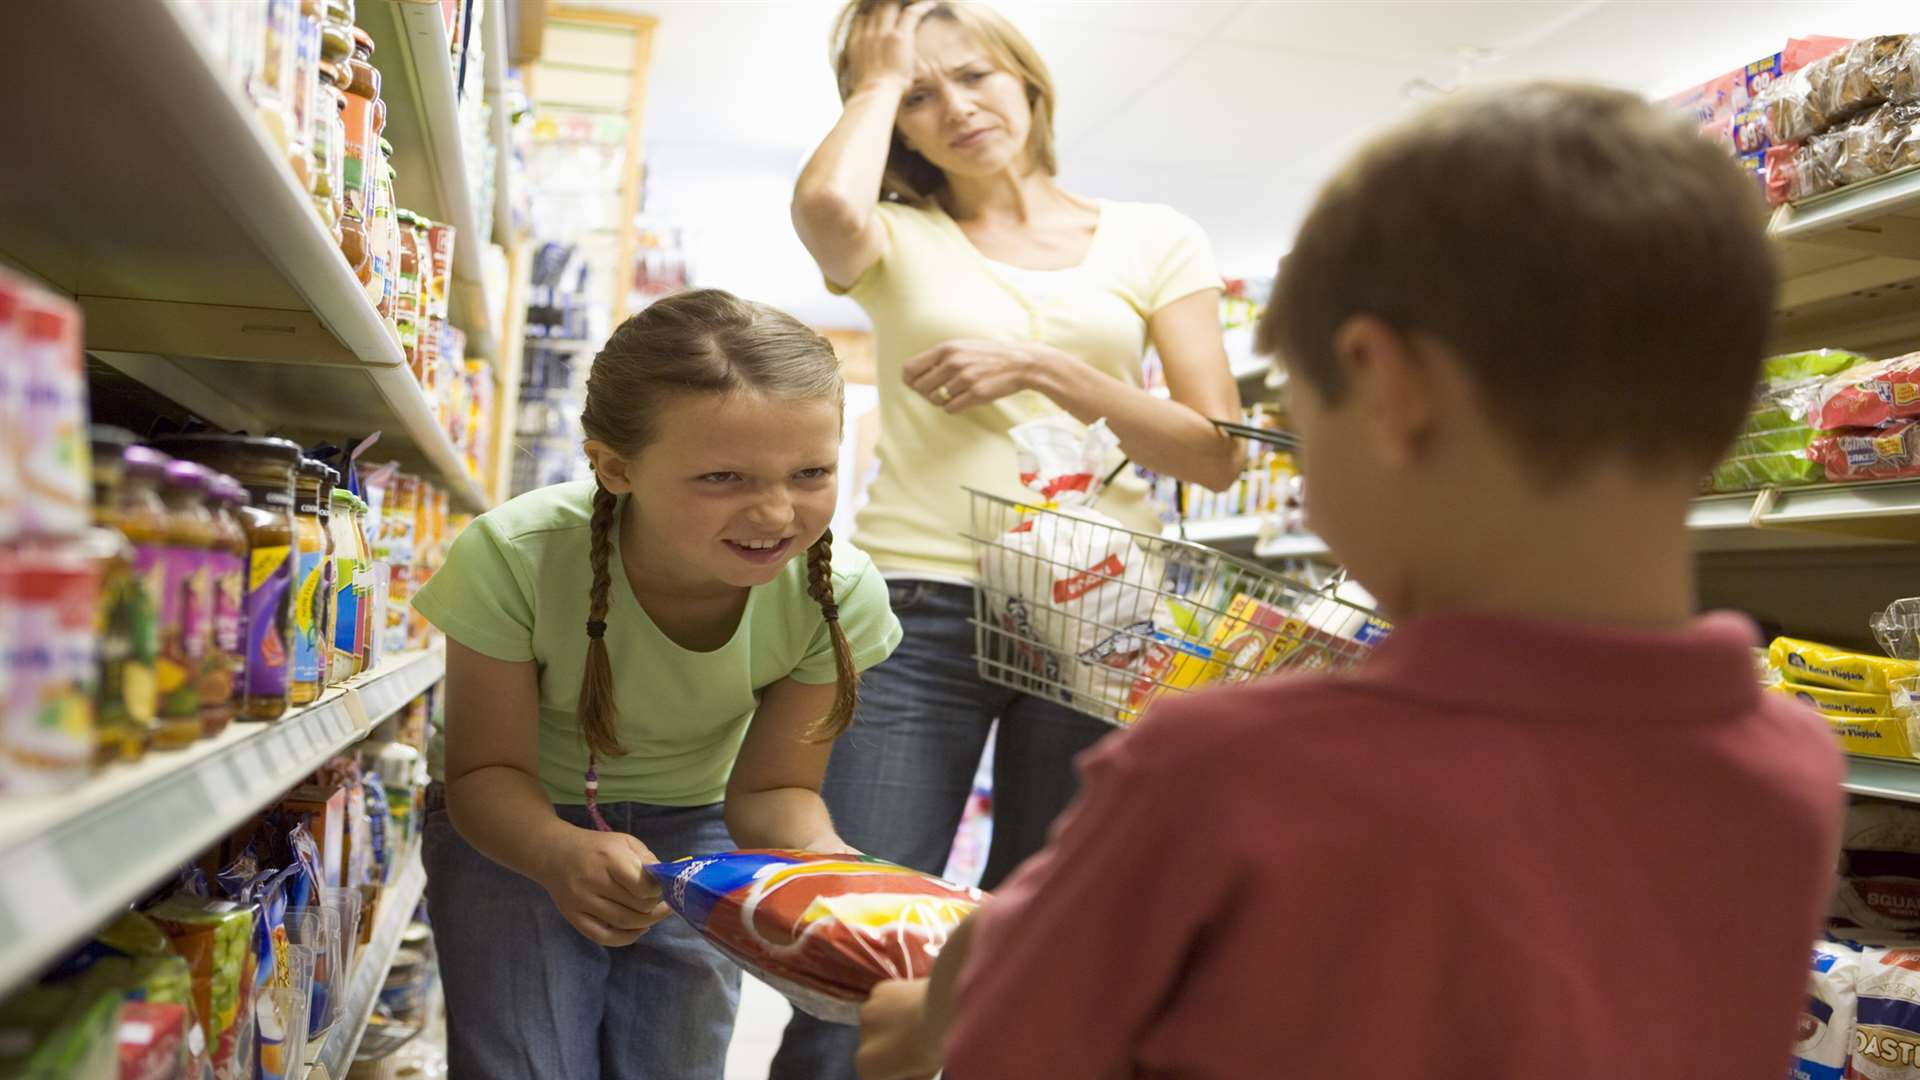 A trip to the shops with the family can quickly turn into a war zone